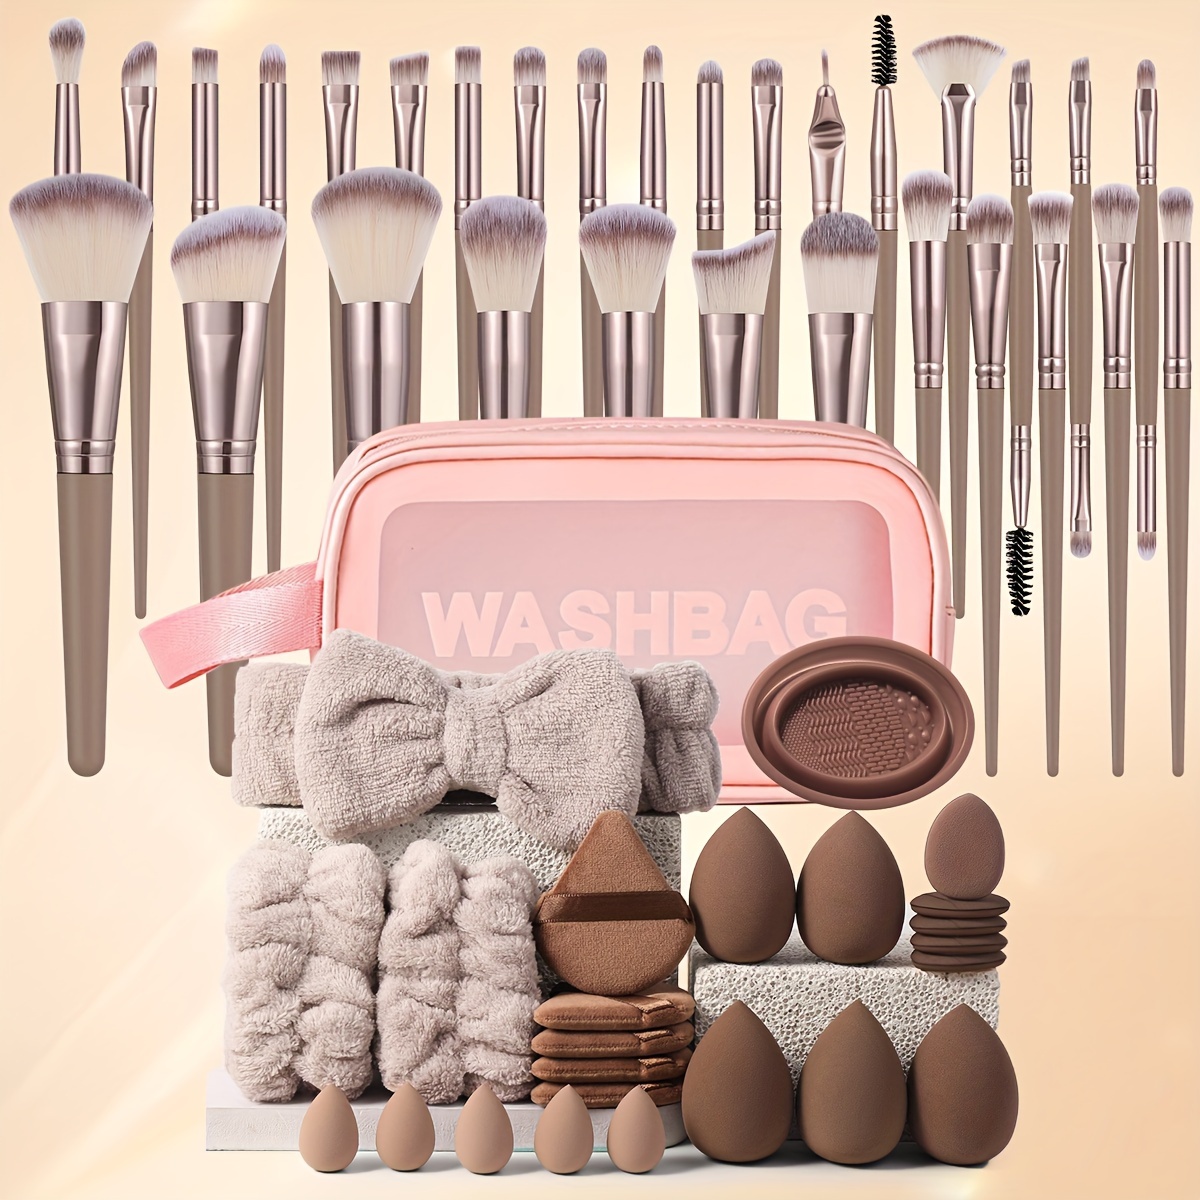 

30-pcs Makeup Brush Set With Travel Wash Bag, Hair Bands & Sponges - Nylon Bristles, Abs Handle, Alcohol-free, Palm Brush Design For Flawless Application - Suitable For Normal Skin Types